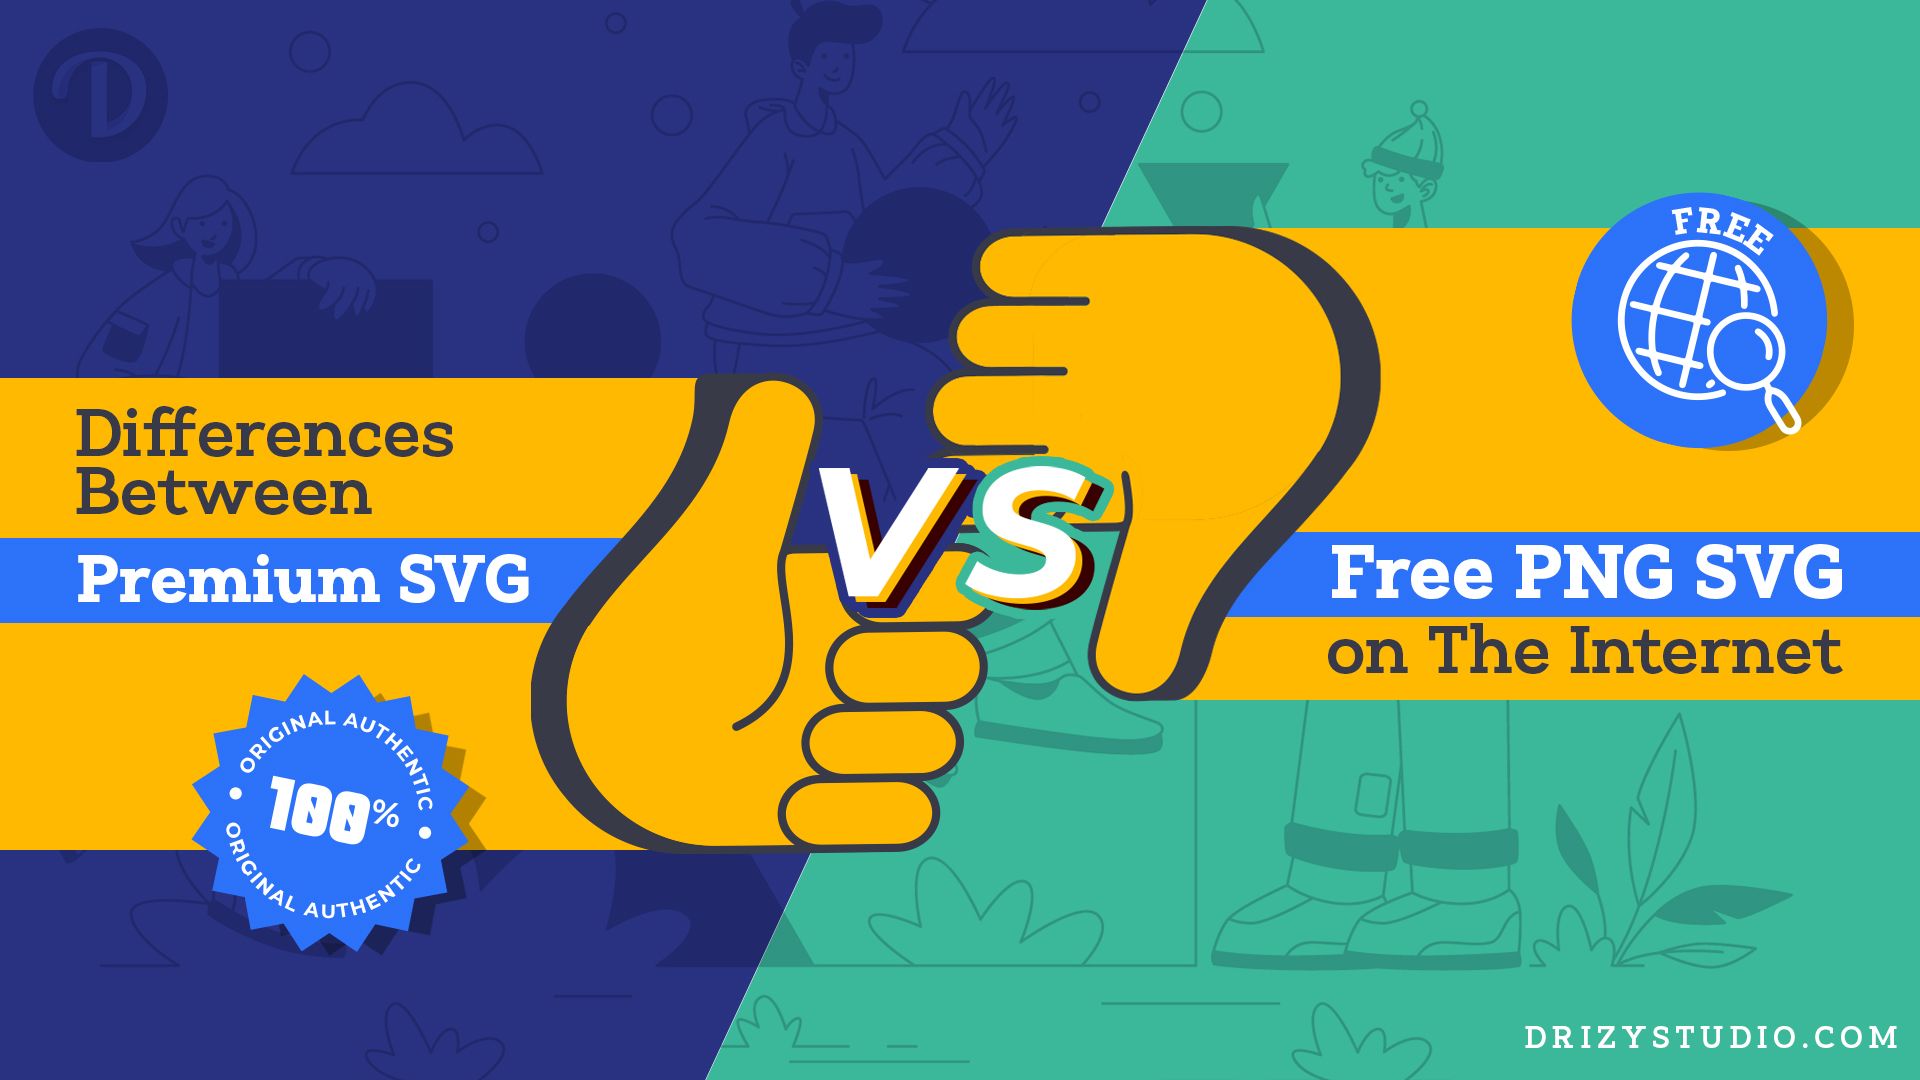 Differences Between Premium SVG vs Free PNG SVG on The Internet cover